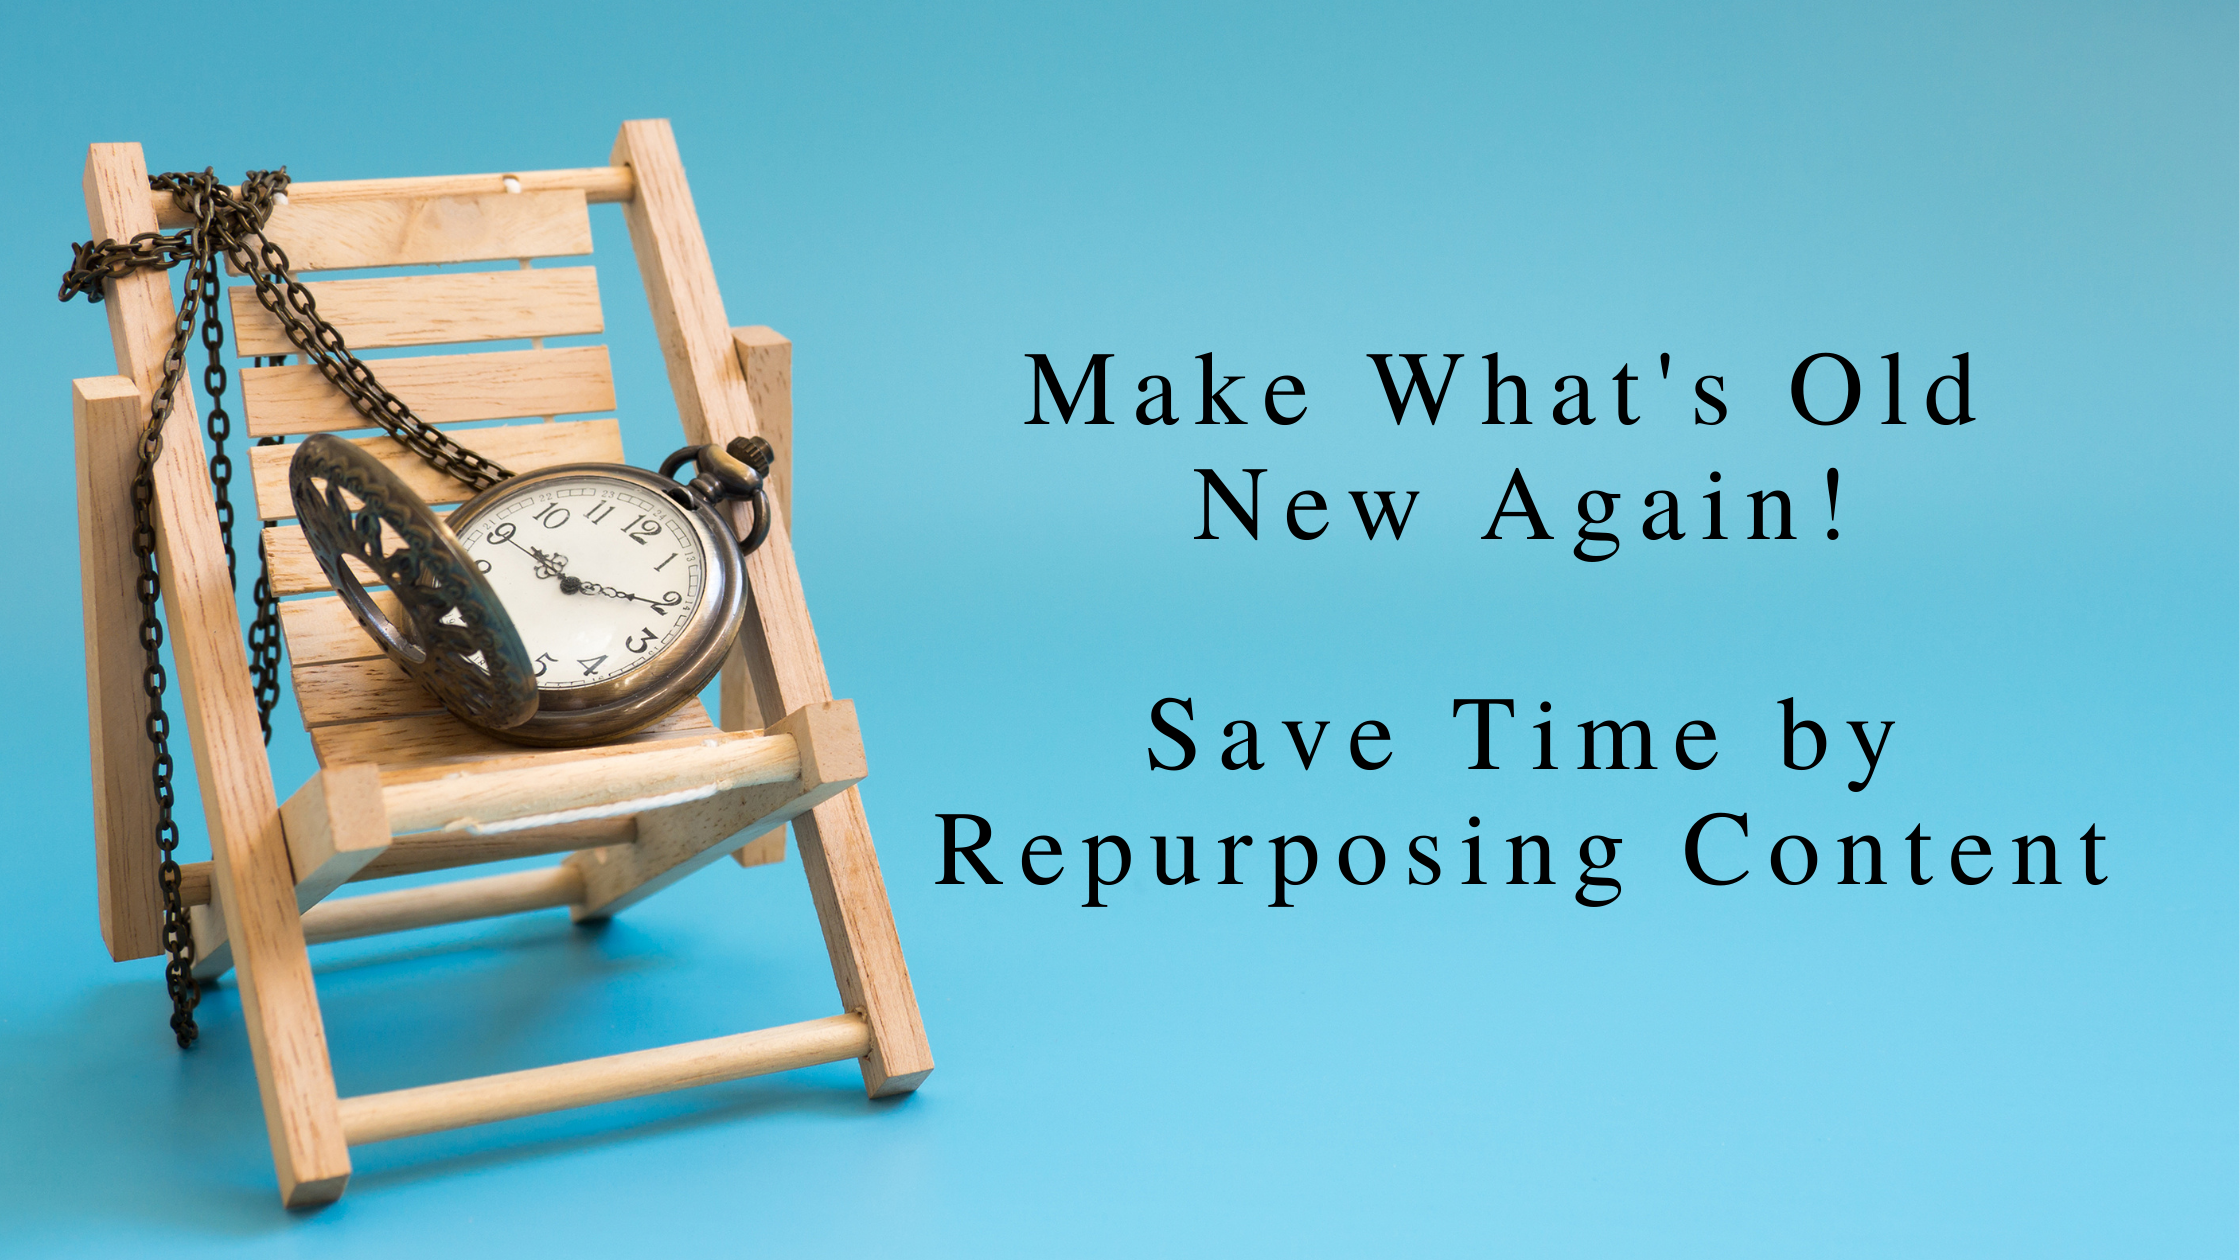 How to Repurpose Content to Reinforce Targeted Messaging & Save Time